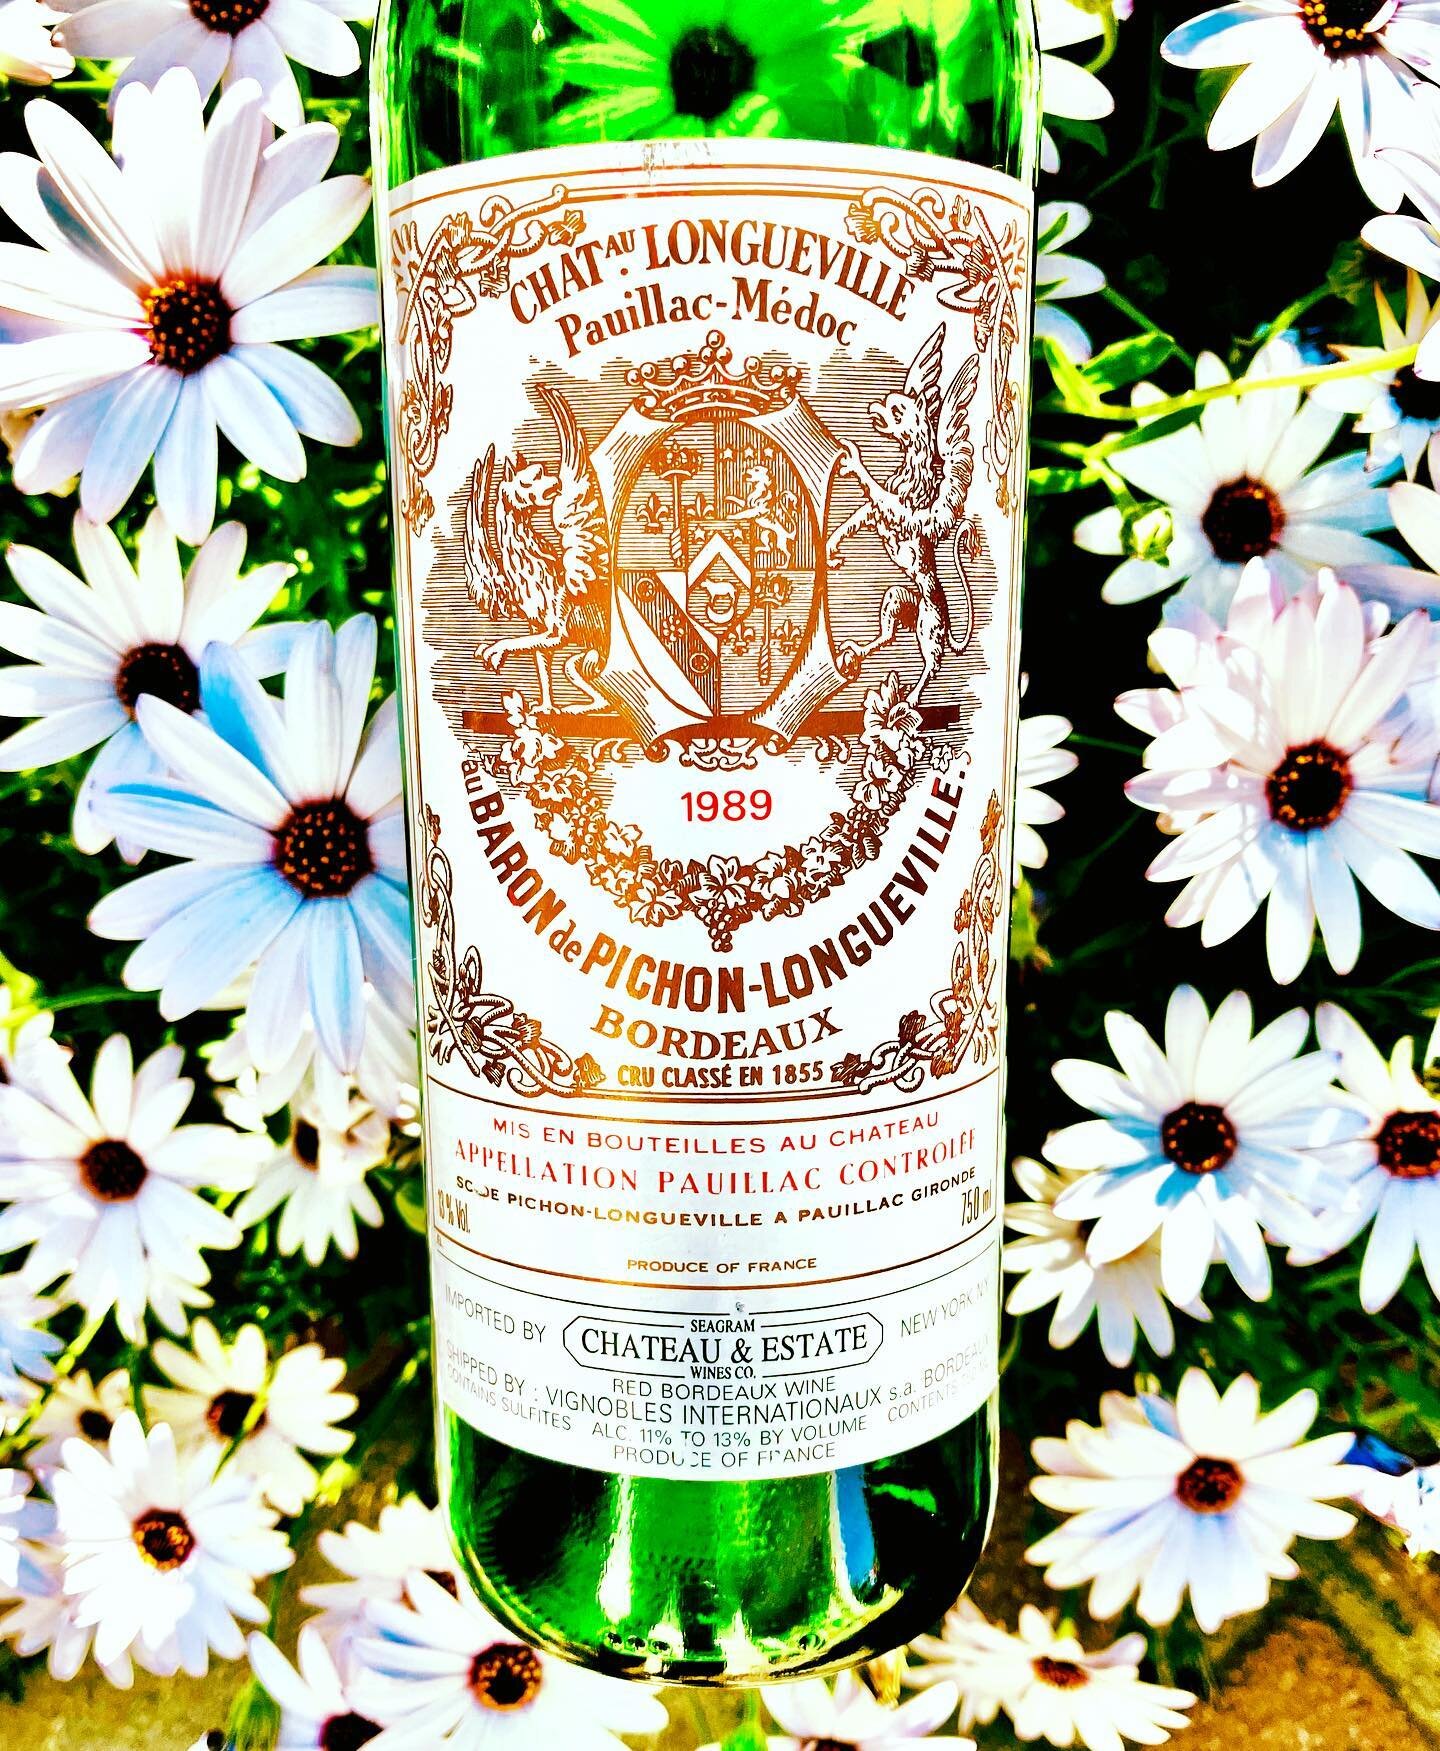 Could you have the patience to wait 34 years to drink this bottle of 1989 Bordeaux? I&rsquo;m glad other wine lovers have more patience than me or I would never drink a wine more than 5 years old. I&rsquo;ll admit I&rsquo;ve been a bad sommelier and 